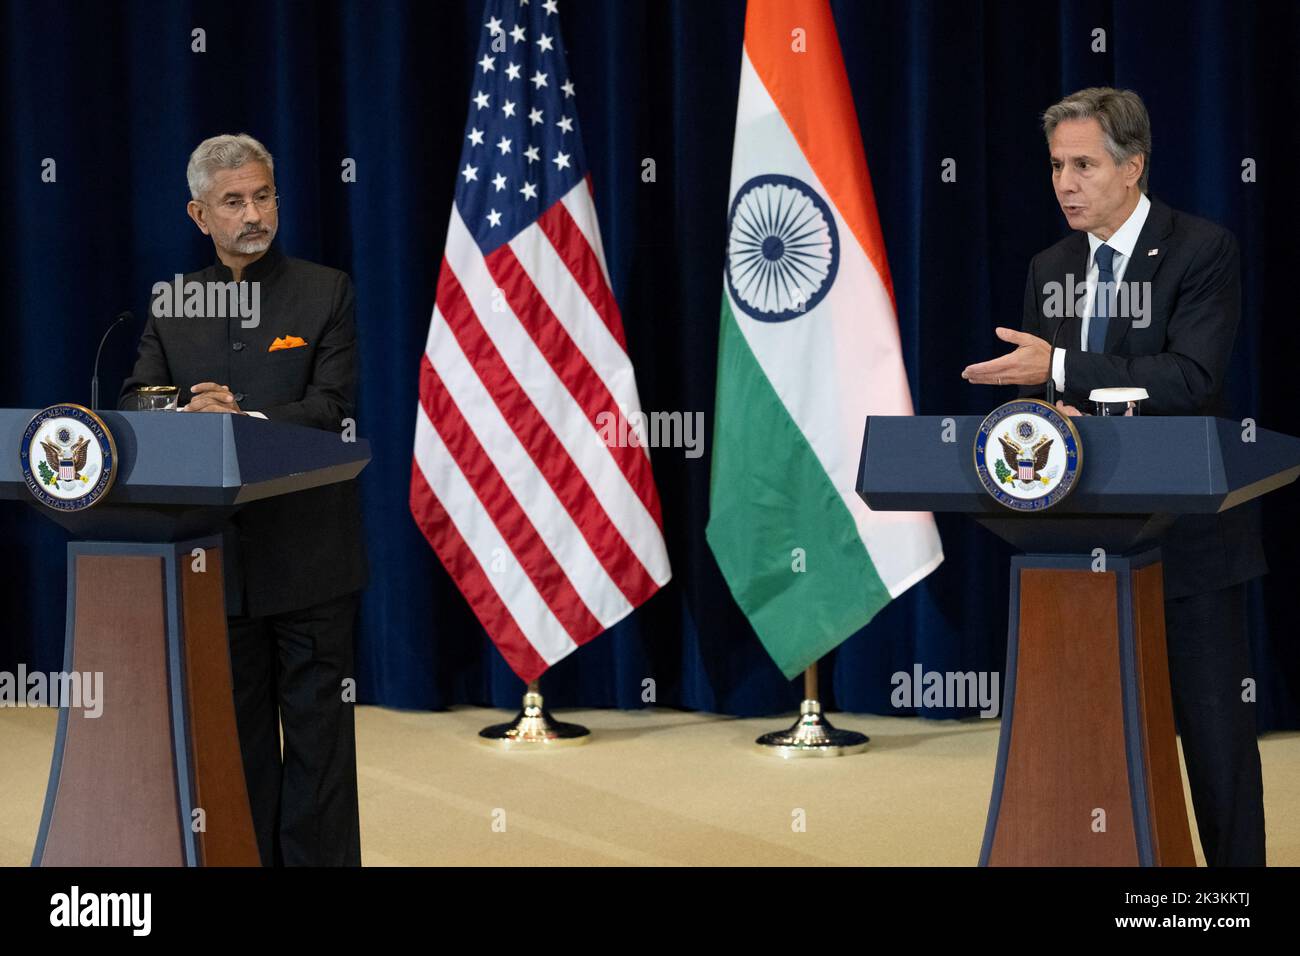 U.S. Secretary of State Antony Blinken and India's Foreign Minister Subrahmanyam Jaishankar hold a news conference at the State Department in Washington, U.S., September 27, 2022. Saul Loeb/Pool via REUTERS Stock Photo